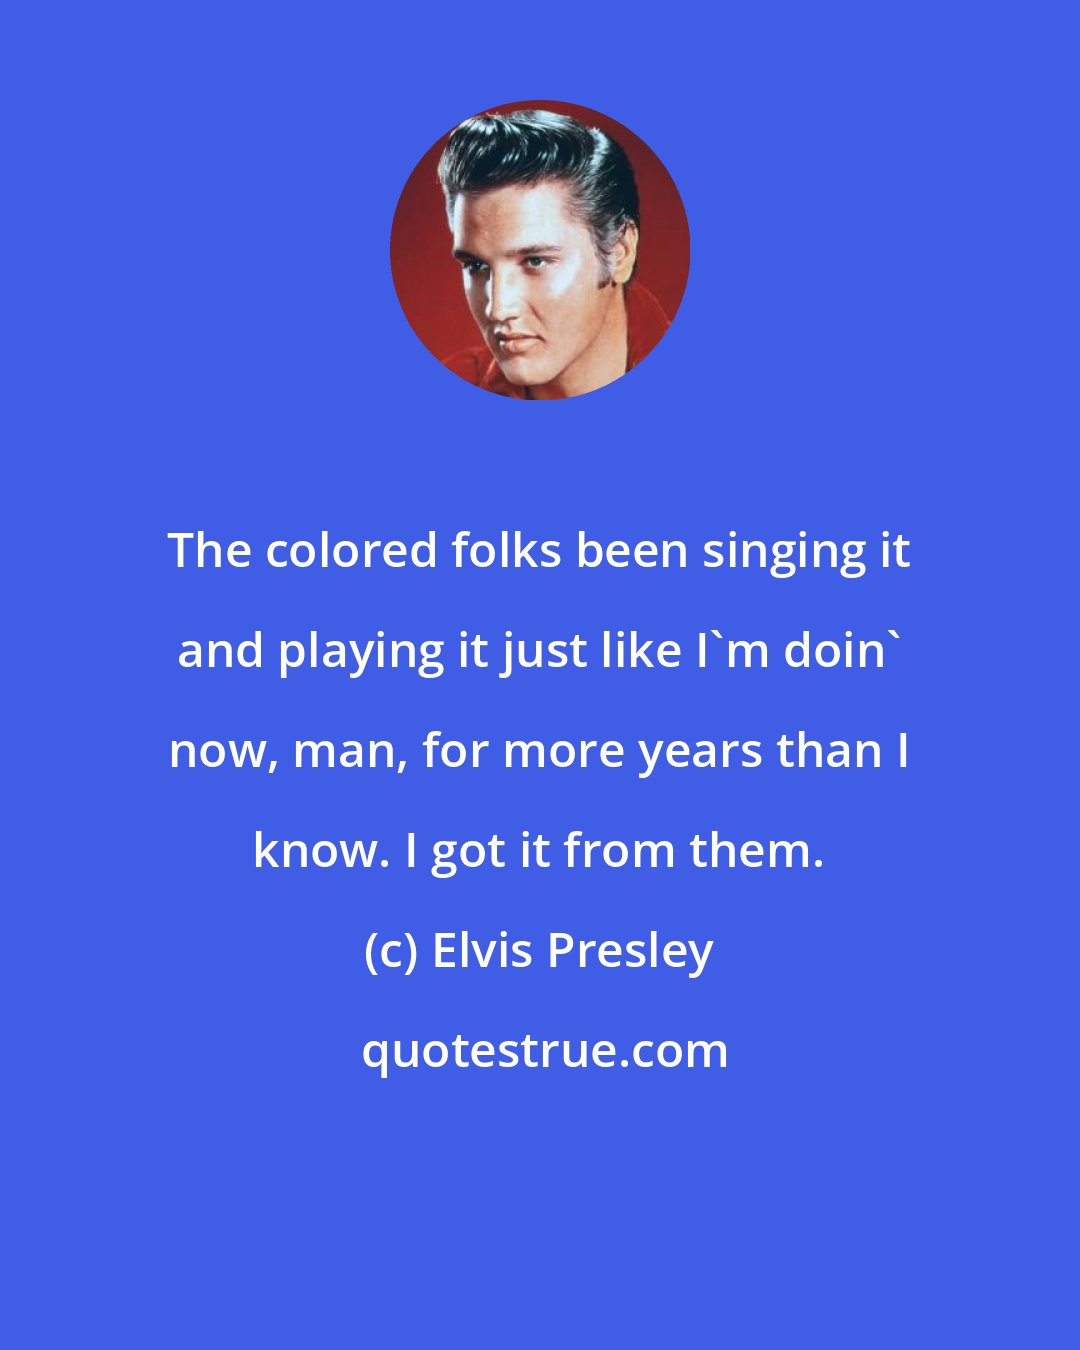 Elvis Presley: The colored folks been singing it and playing it just like I'm doin' now, man, for more years than I know. I got it from them.